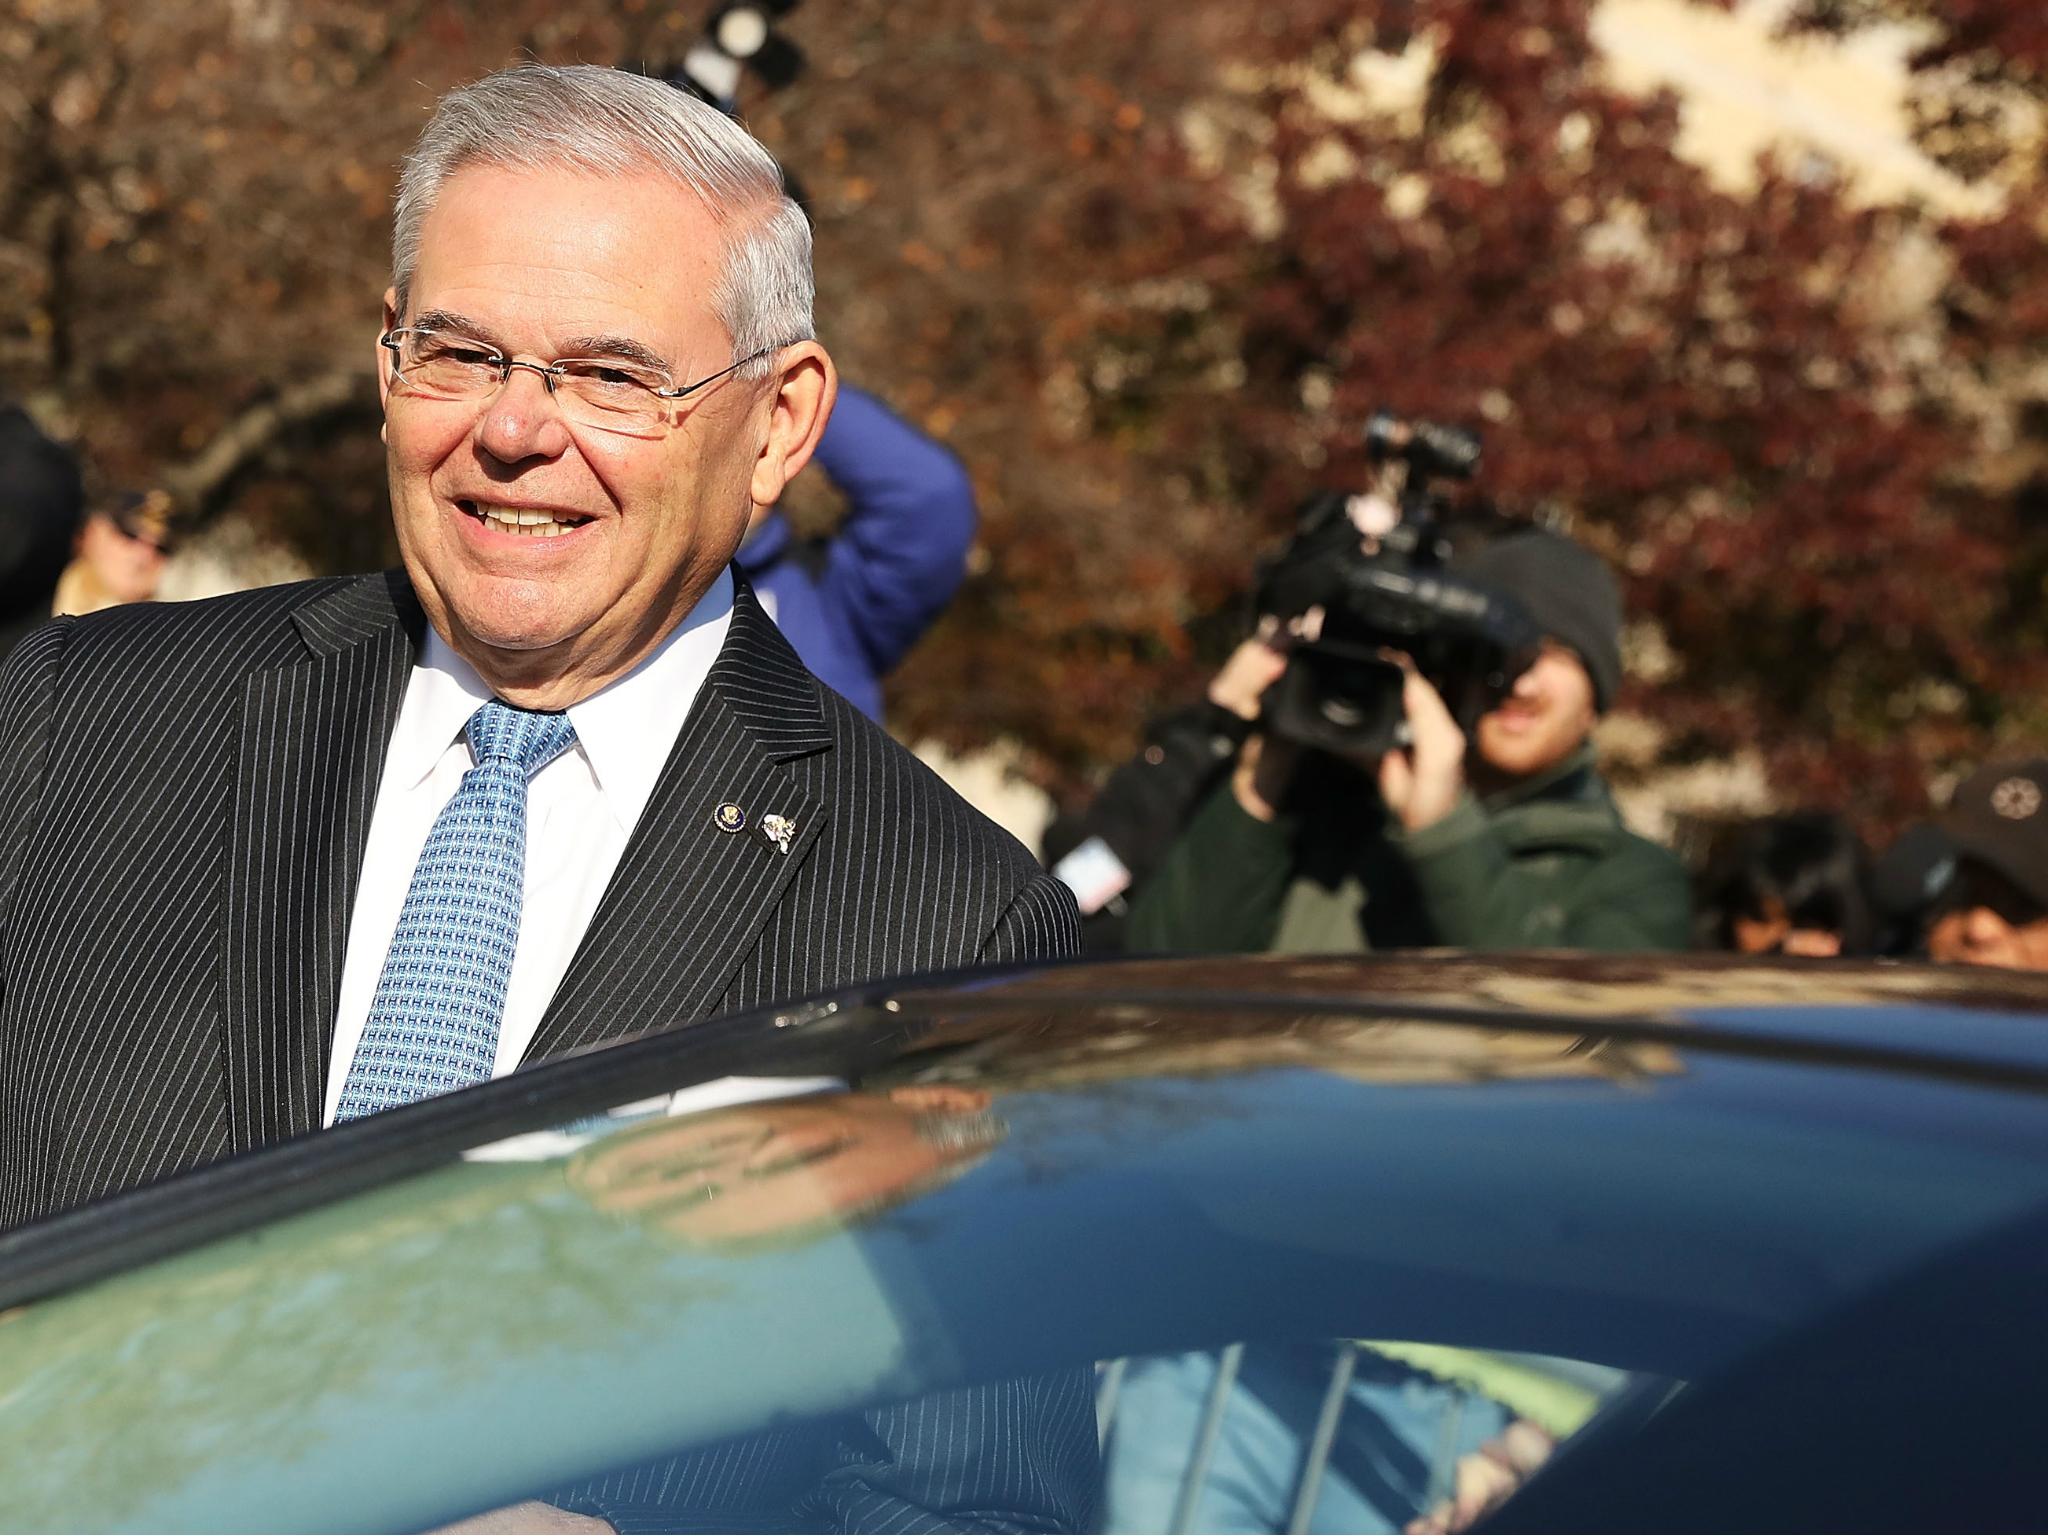 Robert 'Bob' Menendez gets into his car as he departs federal court, 15 November 2017 in Newark, New Jersey, where a mistrial was just declared